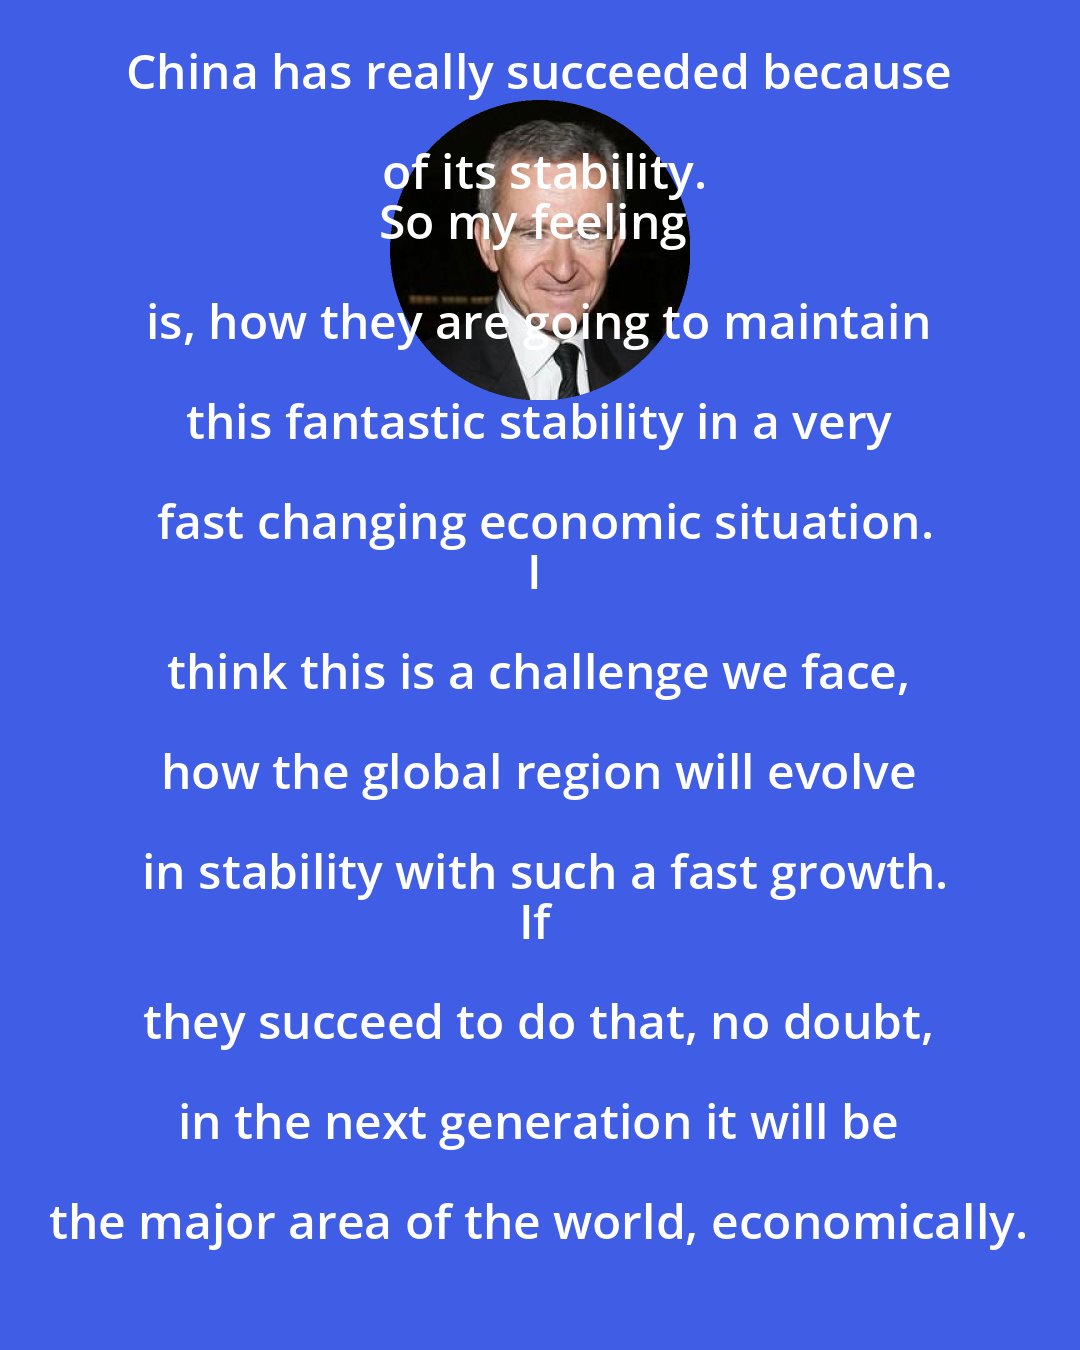 Bernard Arnault: China has really succeeded because of its stability.
So my feeling is, how they are going to maintain this fantastic stability in a very fast changing economic situation.
I think this is a challenge we face, how the global region will evolve in stability with such a fast growth.
If they succeed to do that, no doubt, in the next generation it will be the major area of the world, economically.